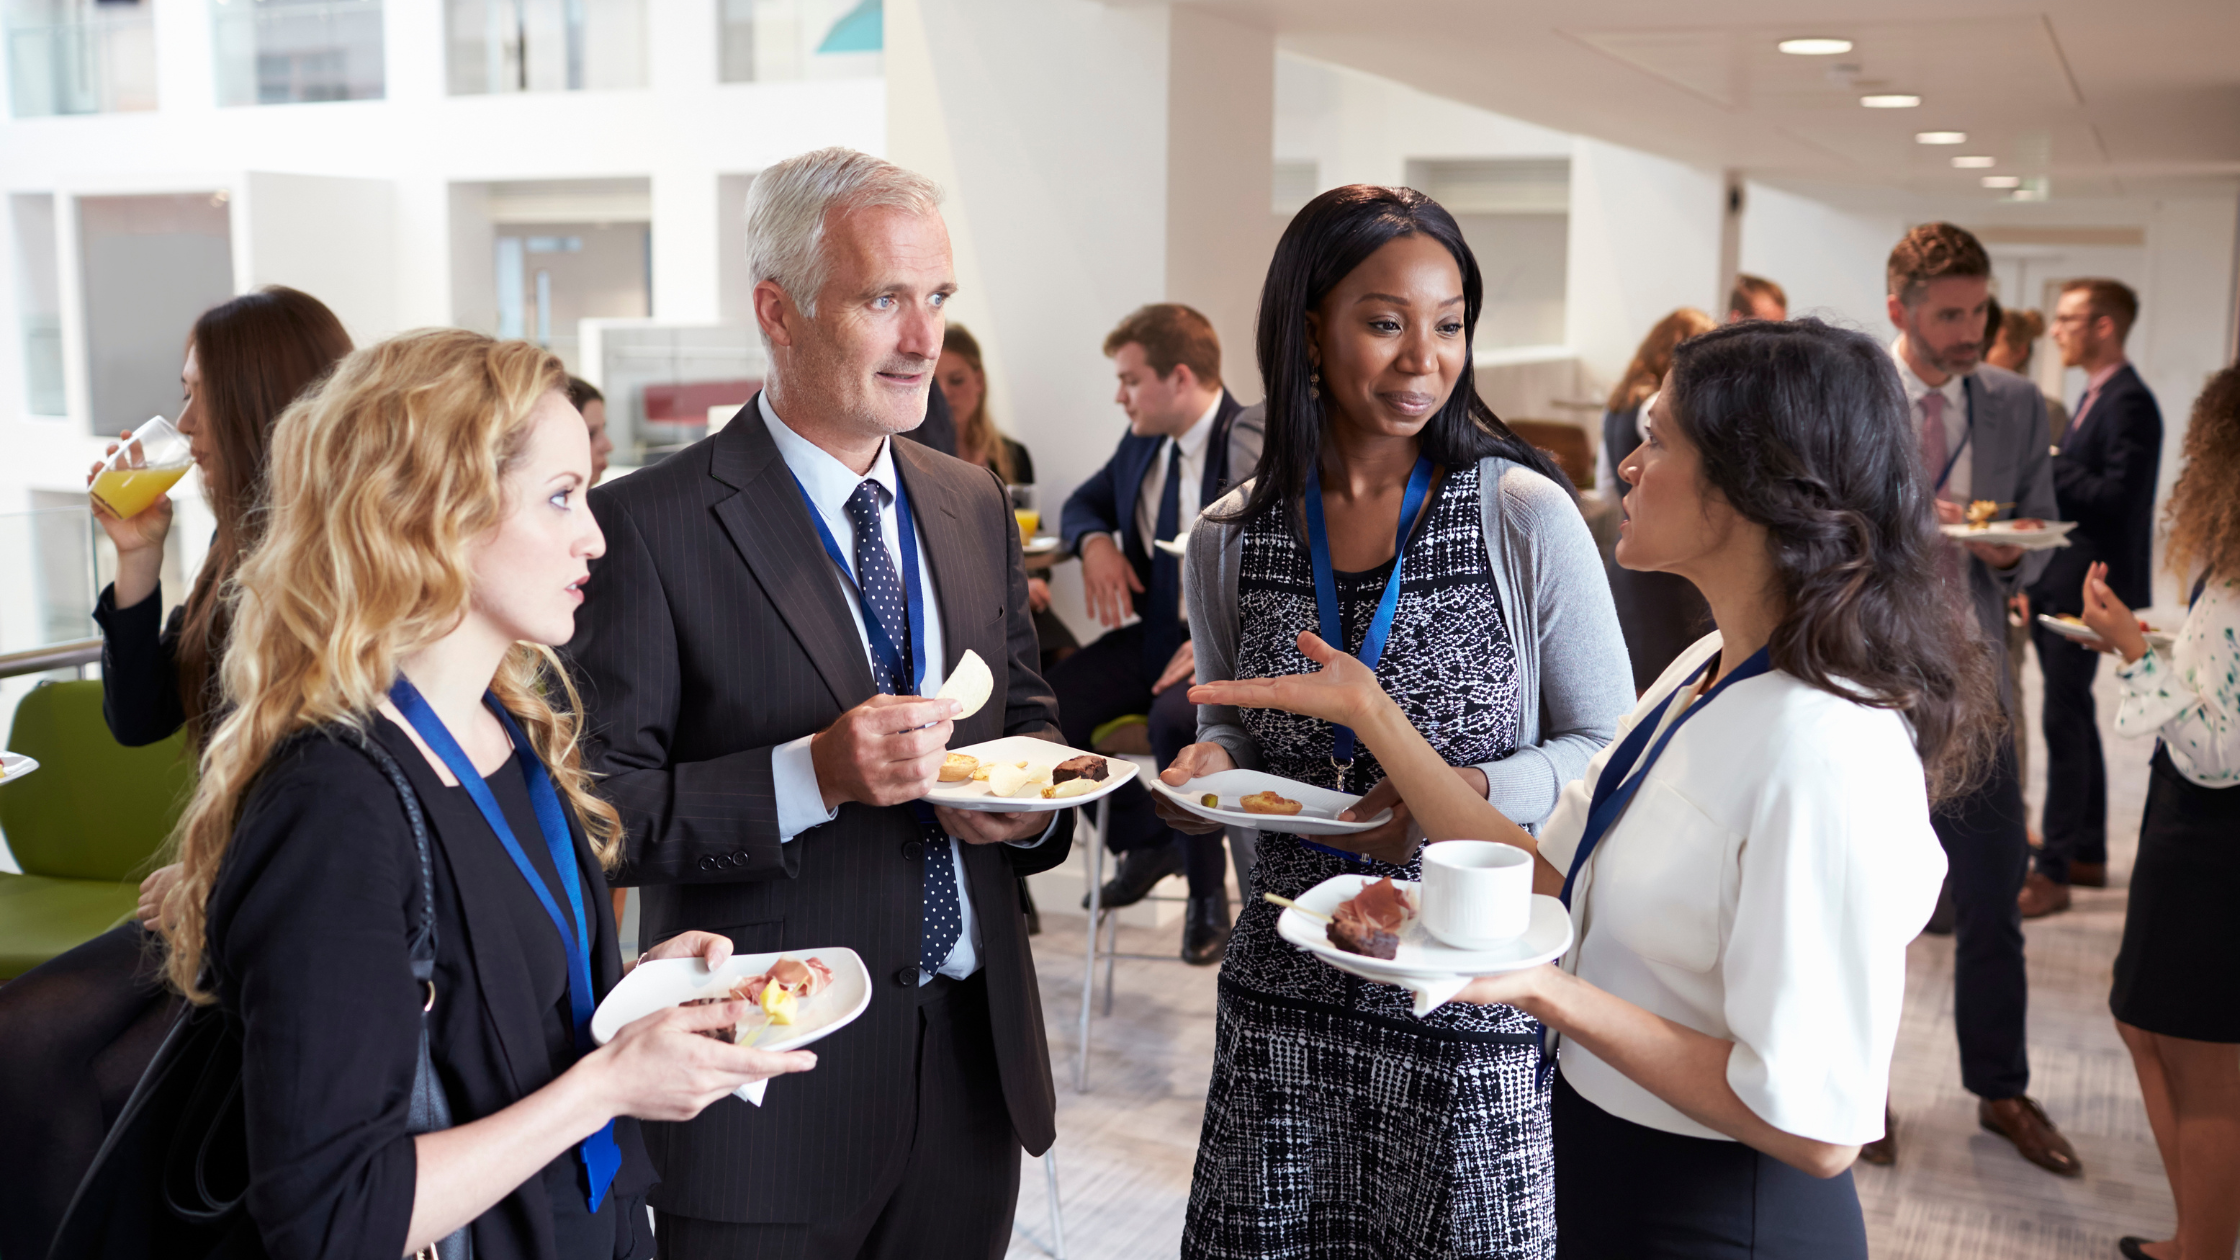 6 Tips to Plan a Great Networking Event